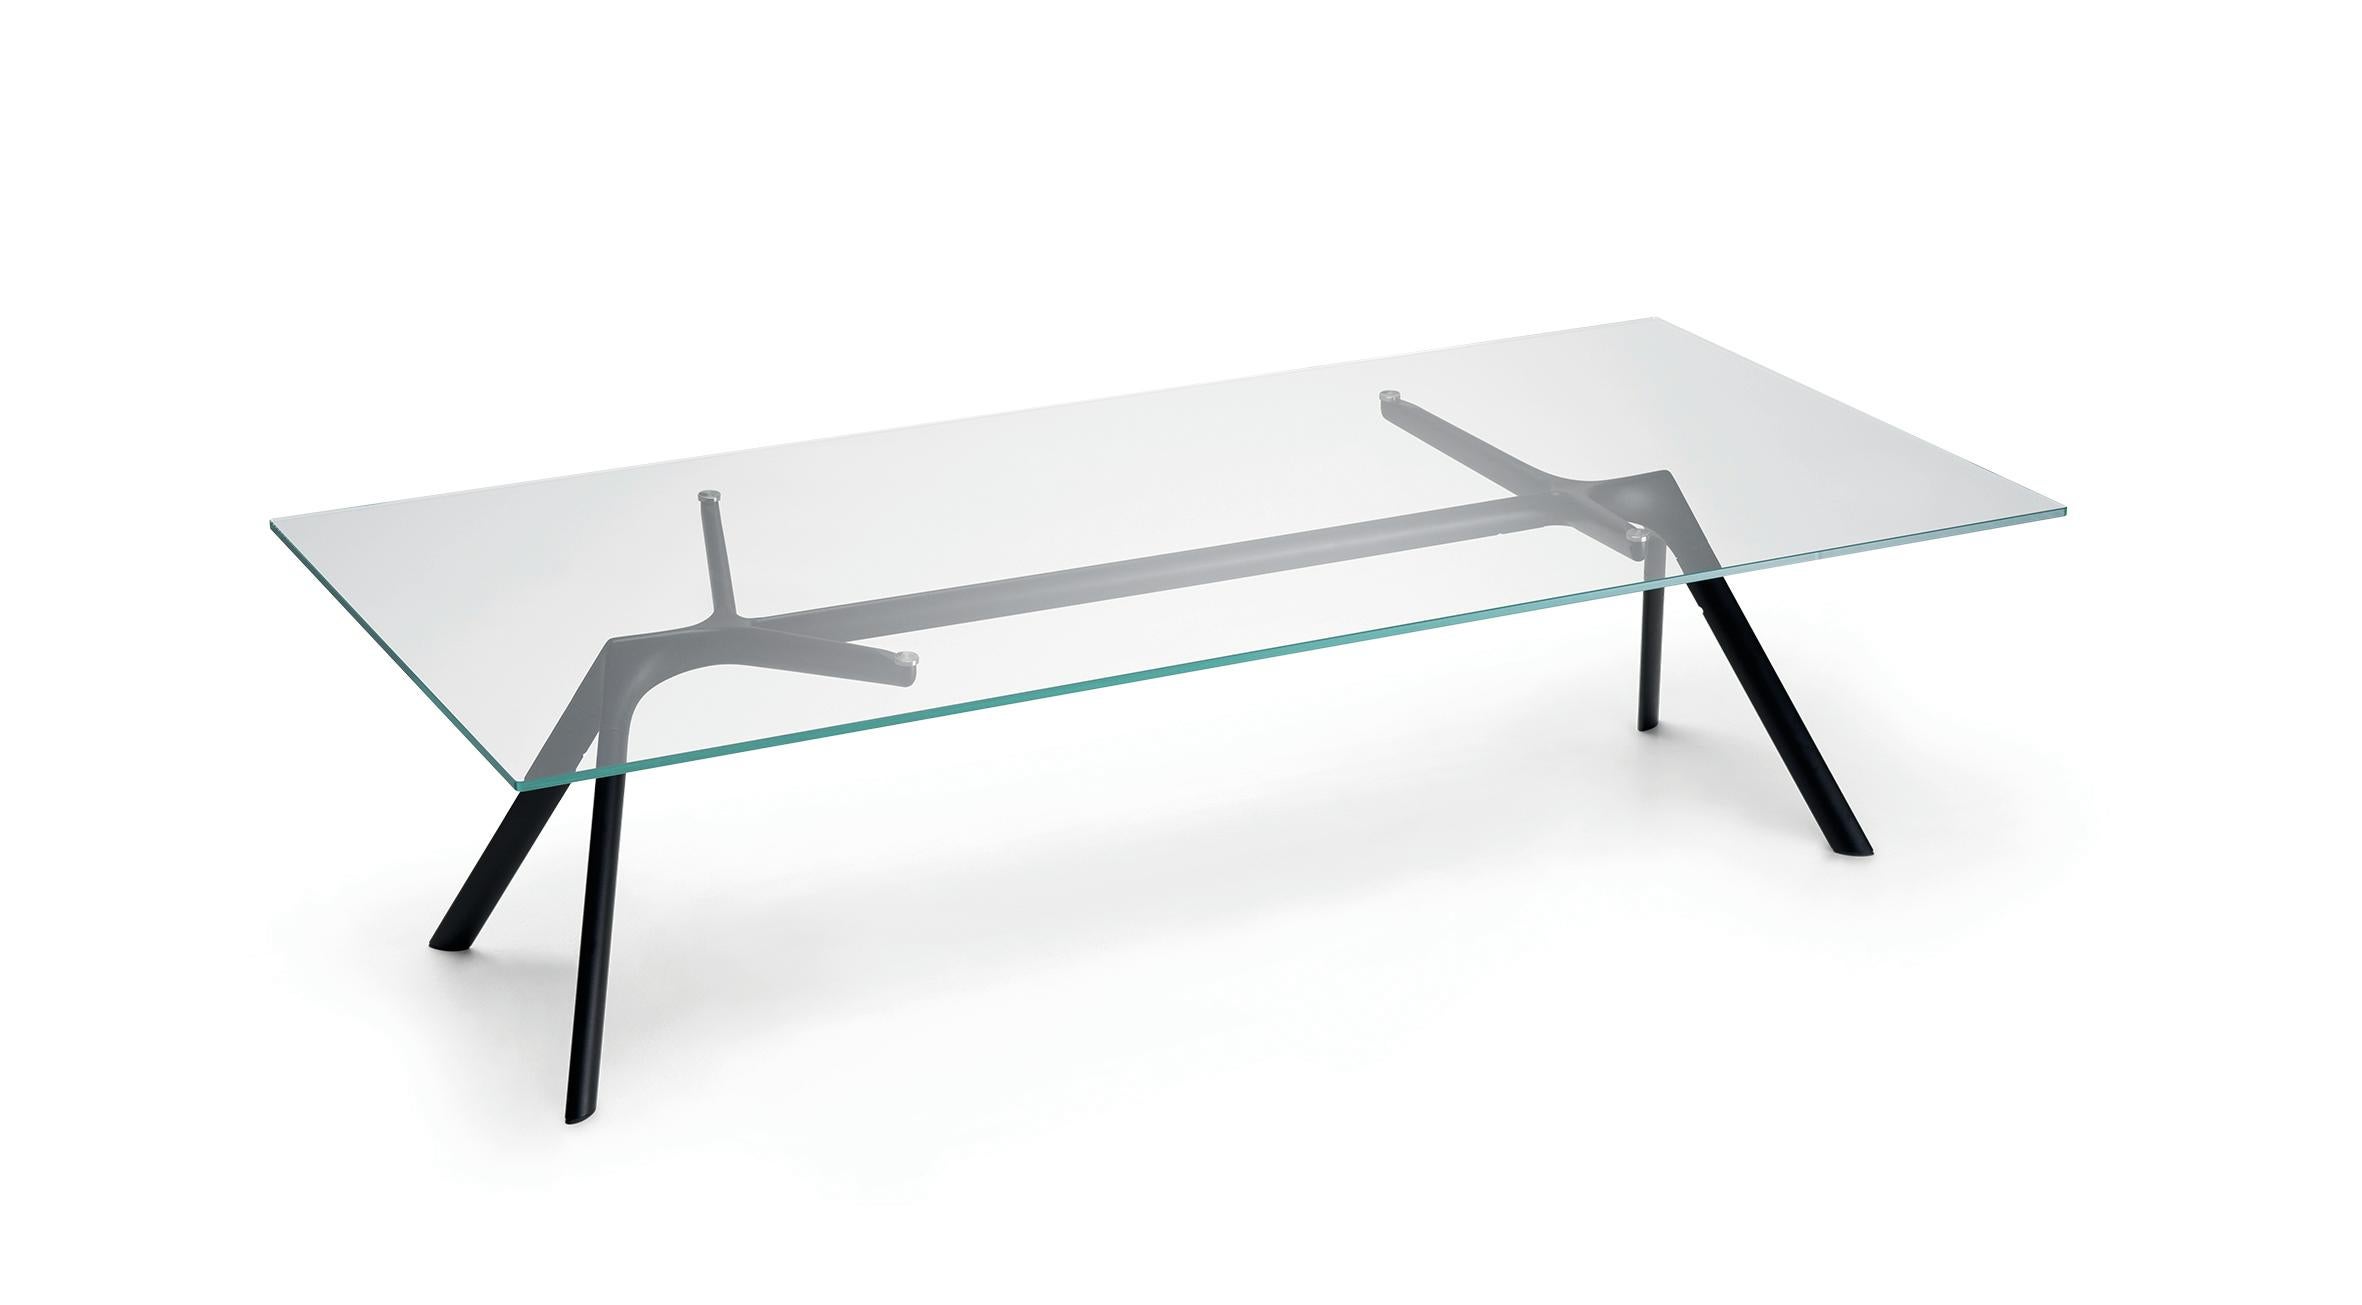 Alias Medium Dry XS 45B Table in Glass Top with Black Lacquered Aluminium Frame by Alberto Meda

Low table with structure made of lacquered aluminium elements. Top in extra light tempered glass, thickness 10 mm.

Born in Lenno Tremezzina (Como),